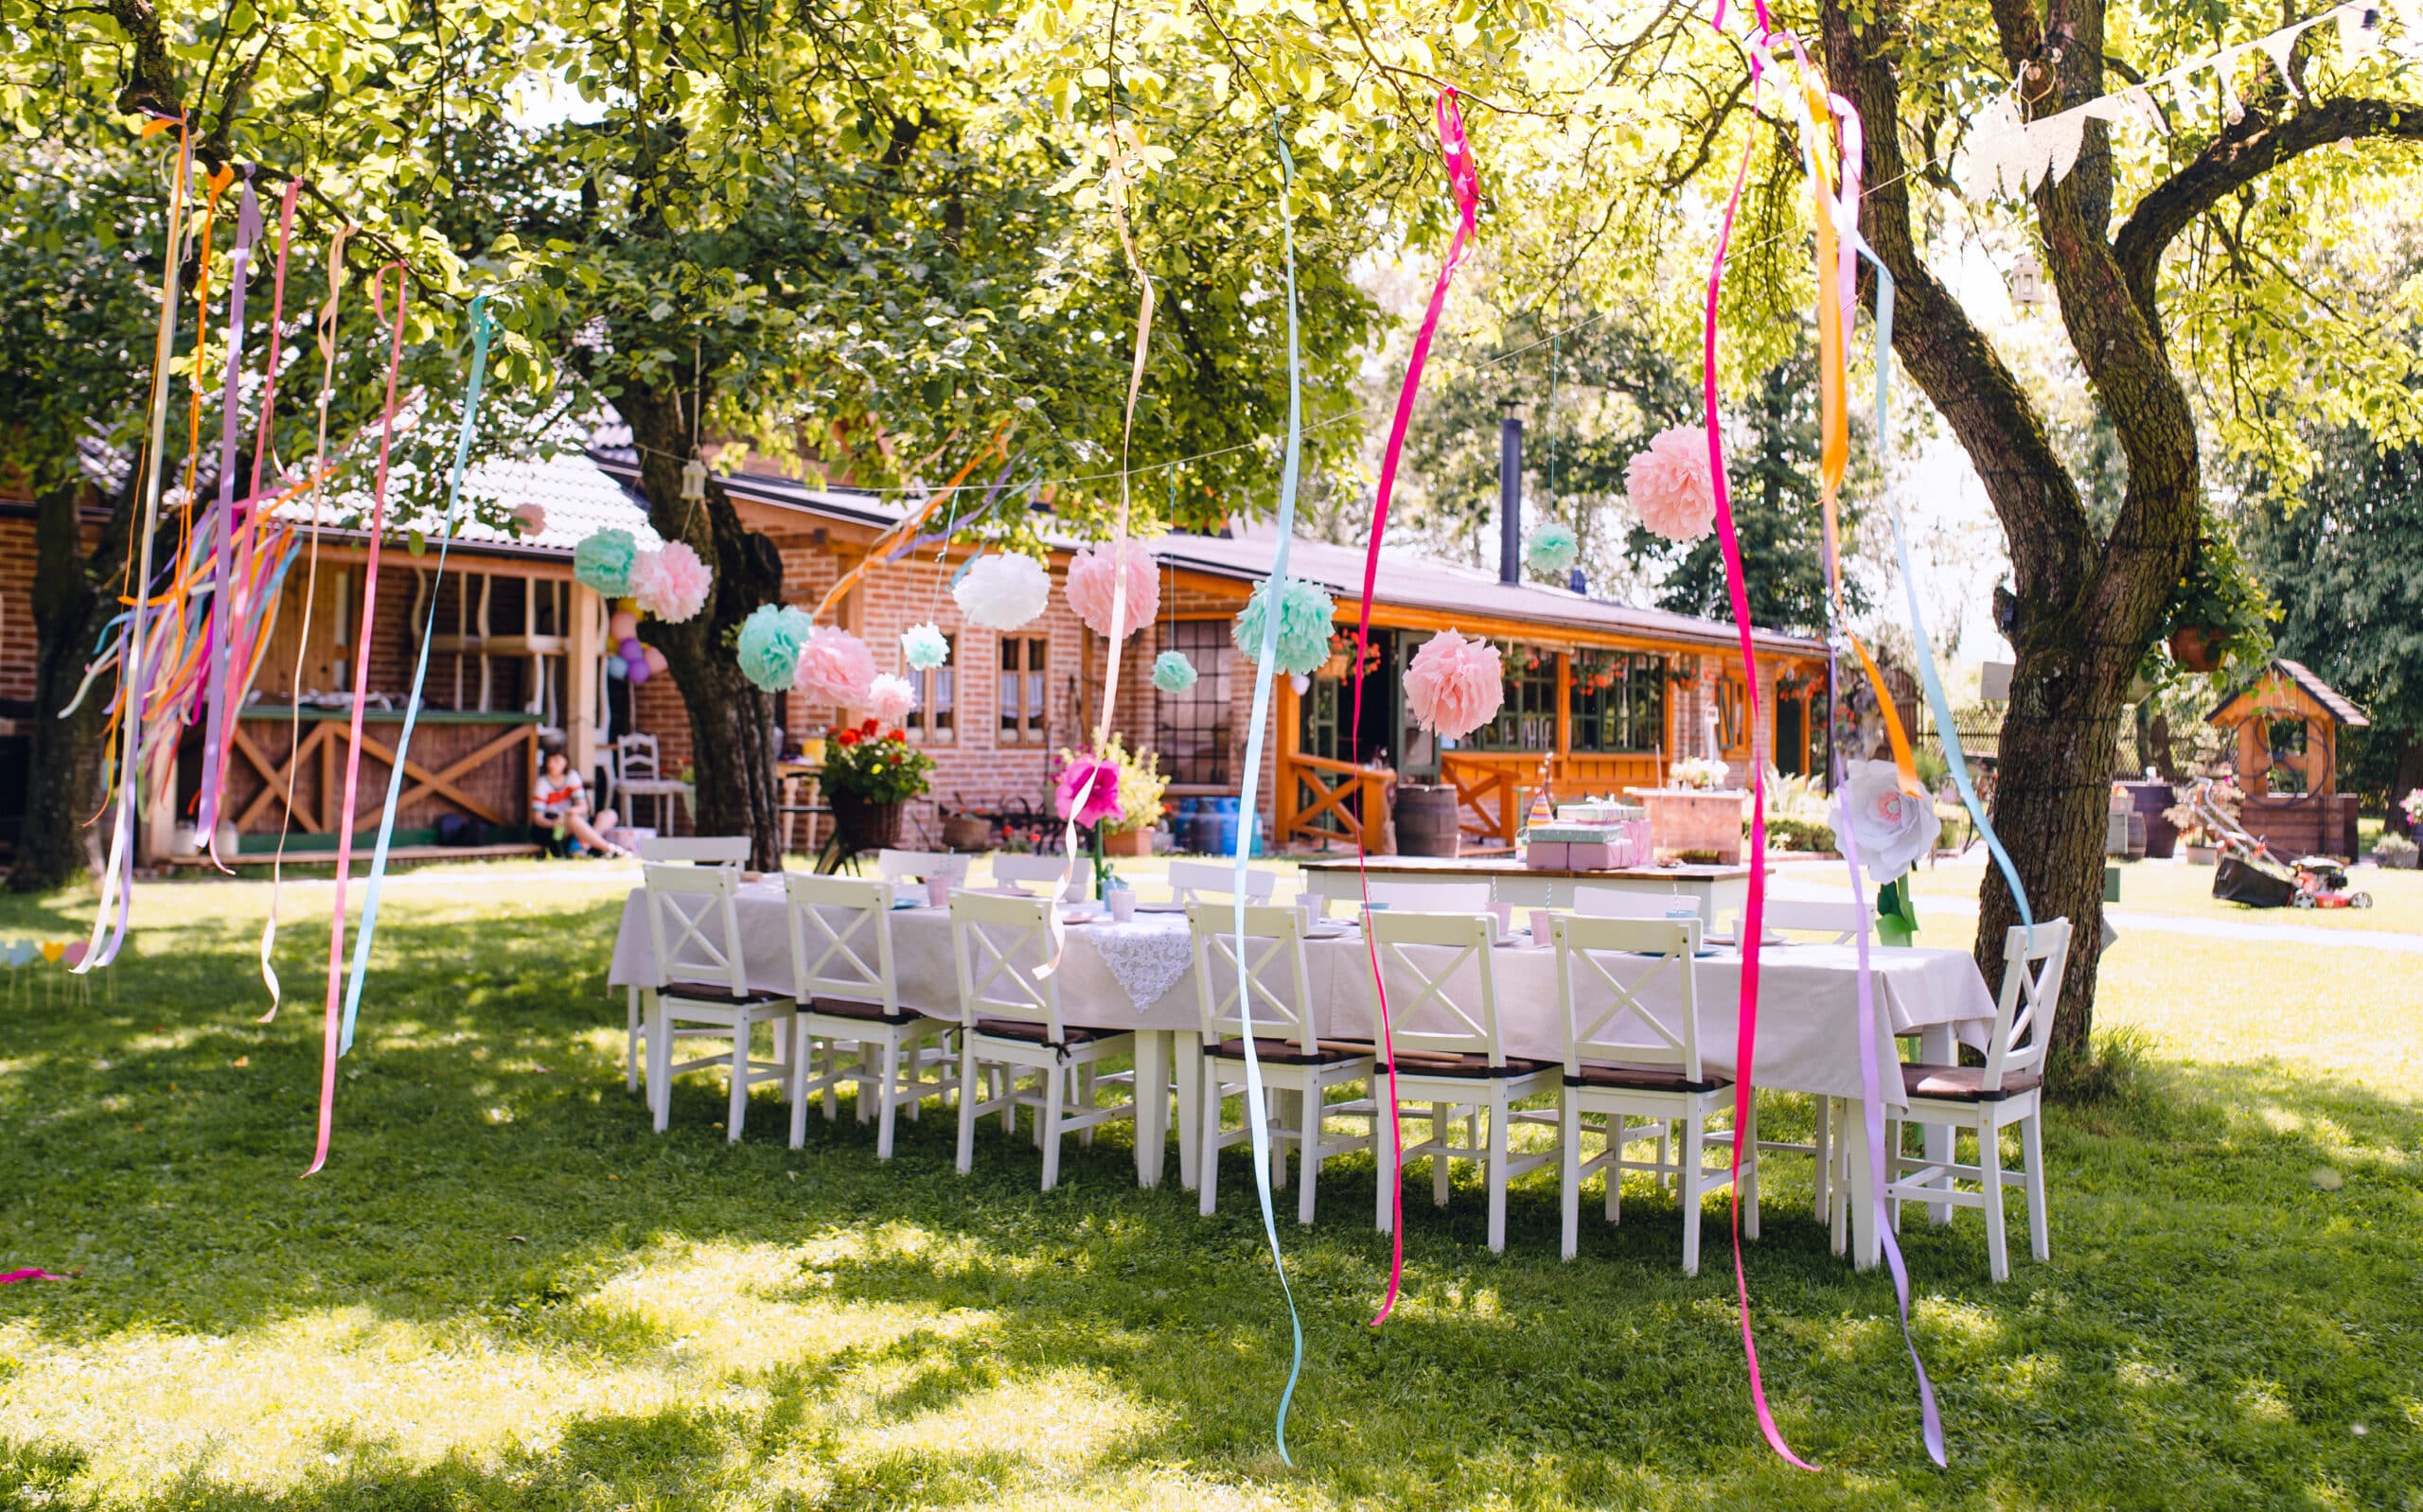 Party Rentals in MA: Throw the Best Kids’ Birthday Party